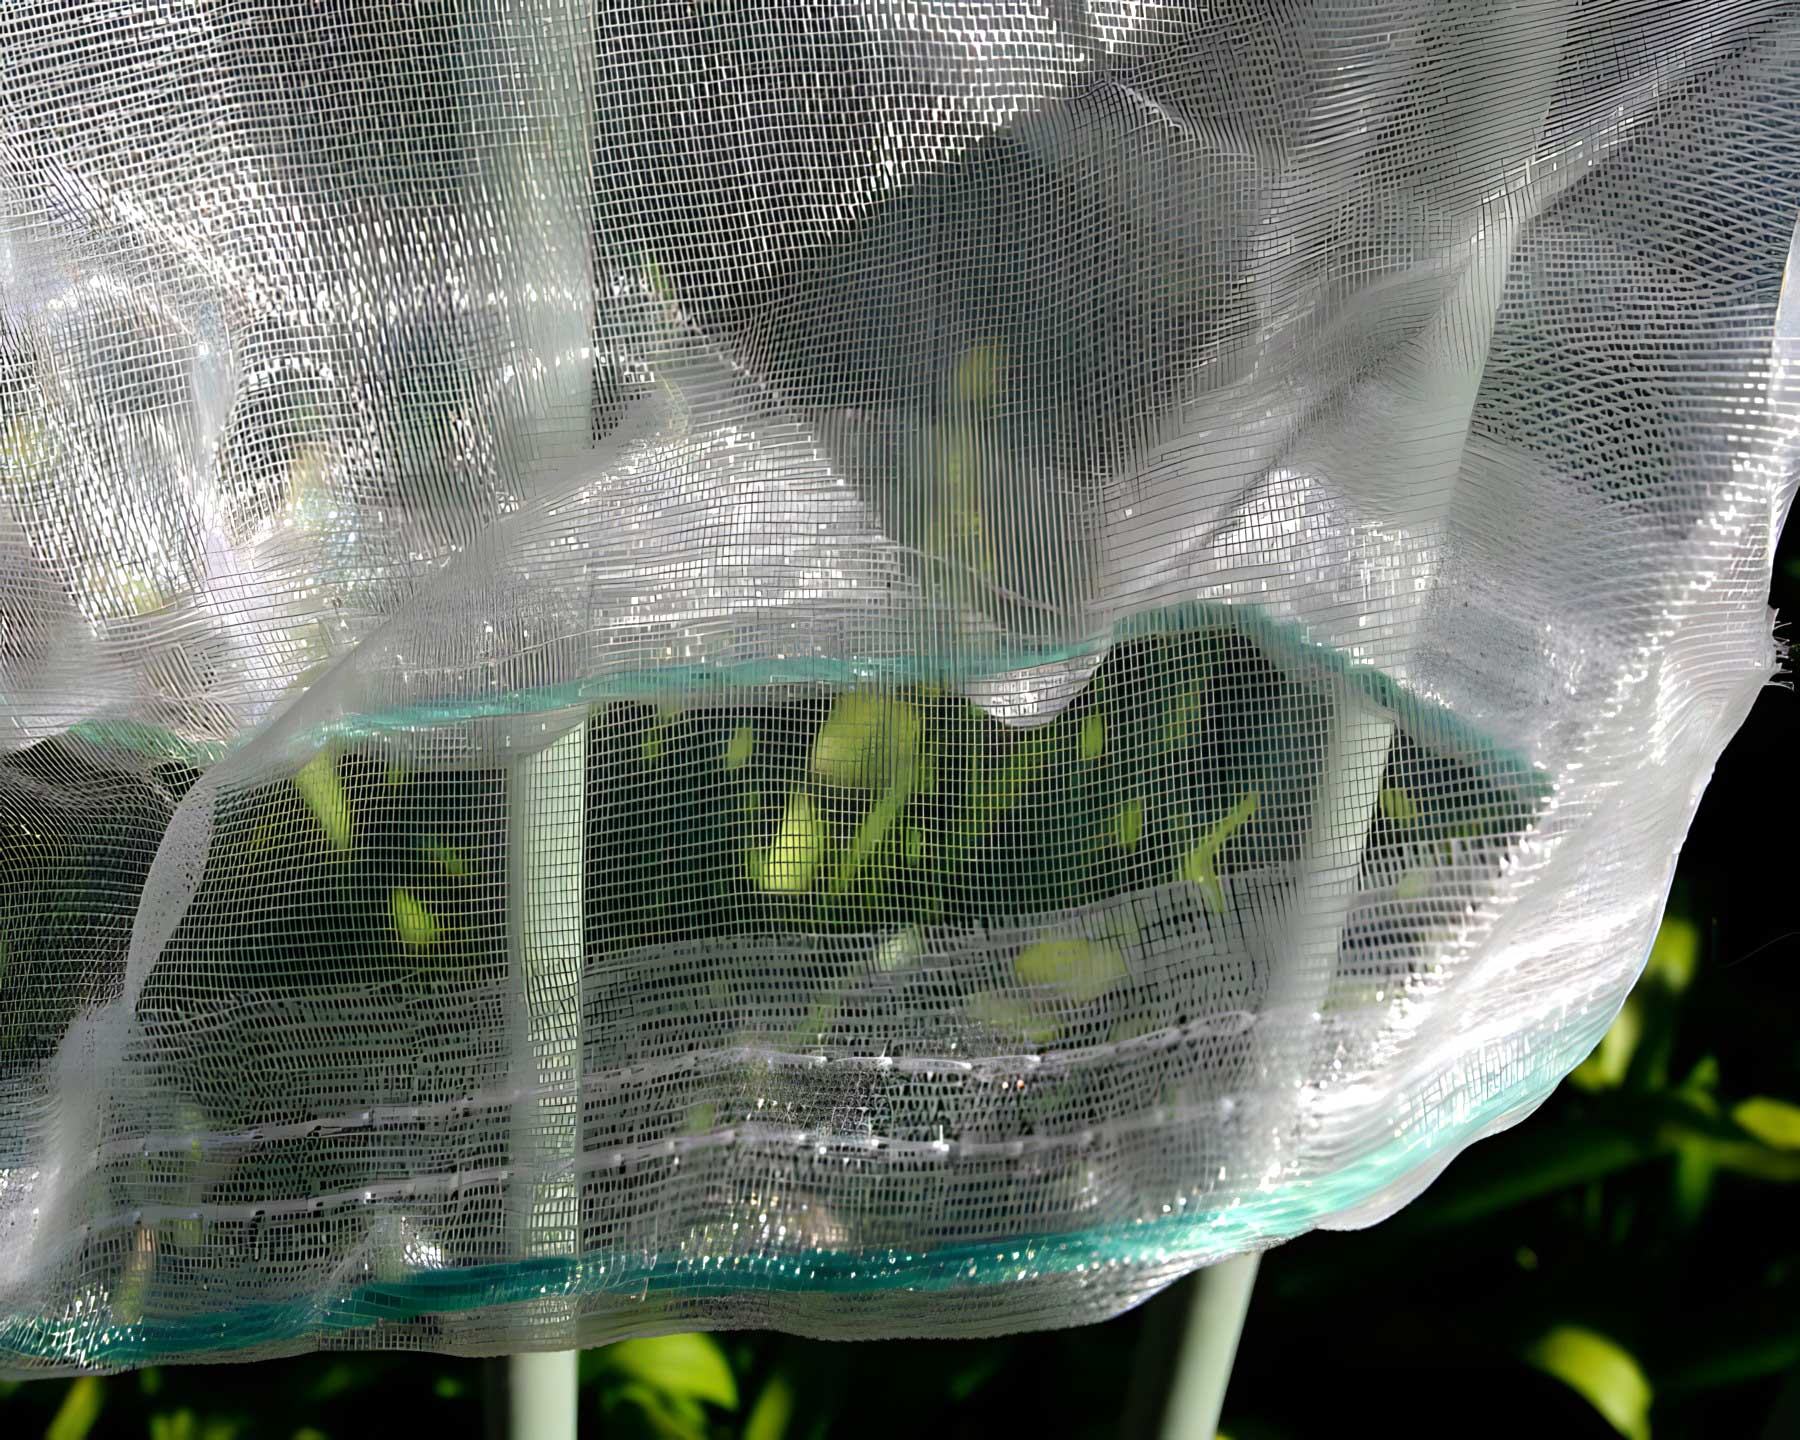 Fruit Saver bags are made of light but tough mesh